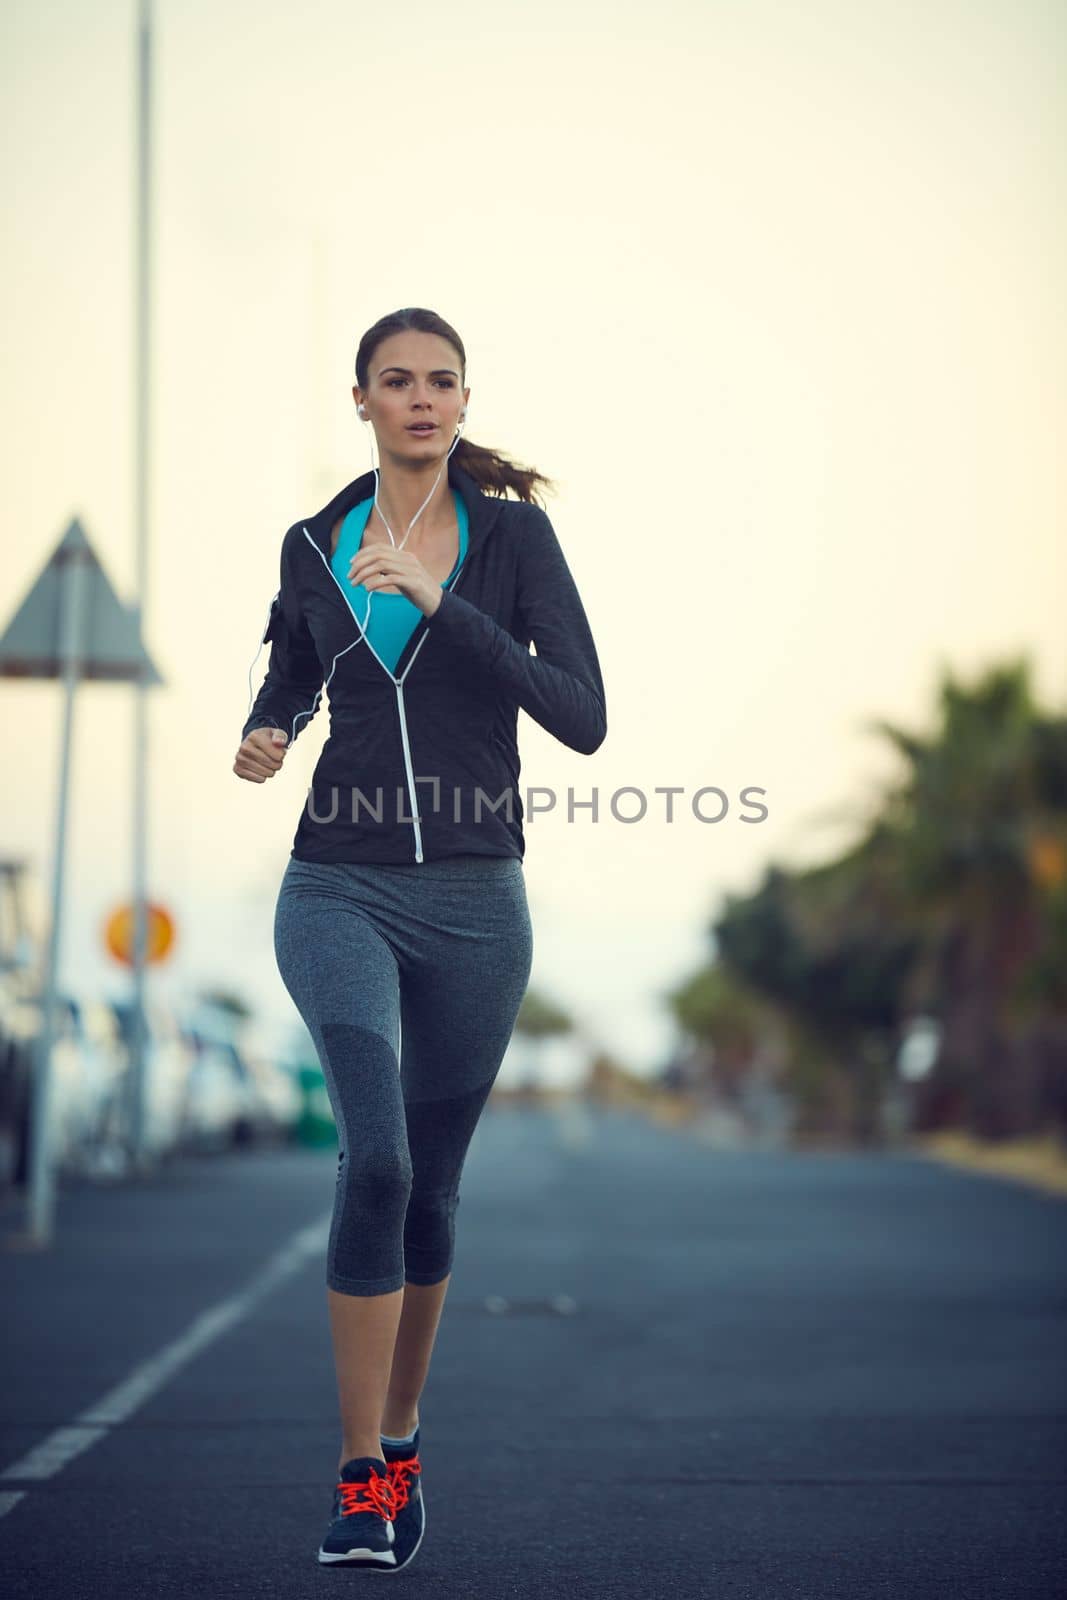 Running can make you feel the most alive. a sporty young woman exercising outdoors